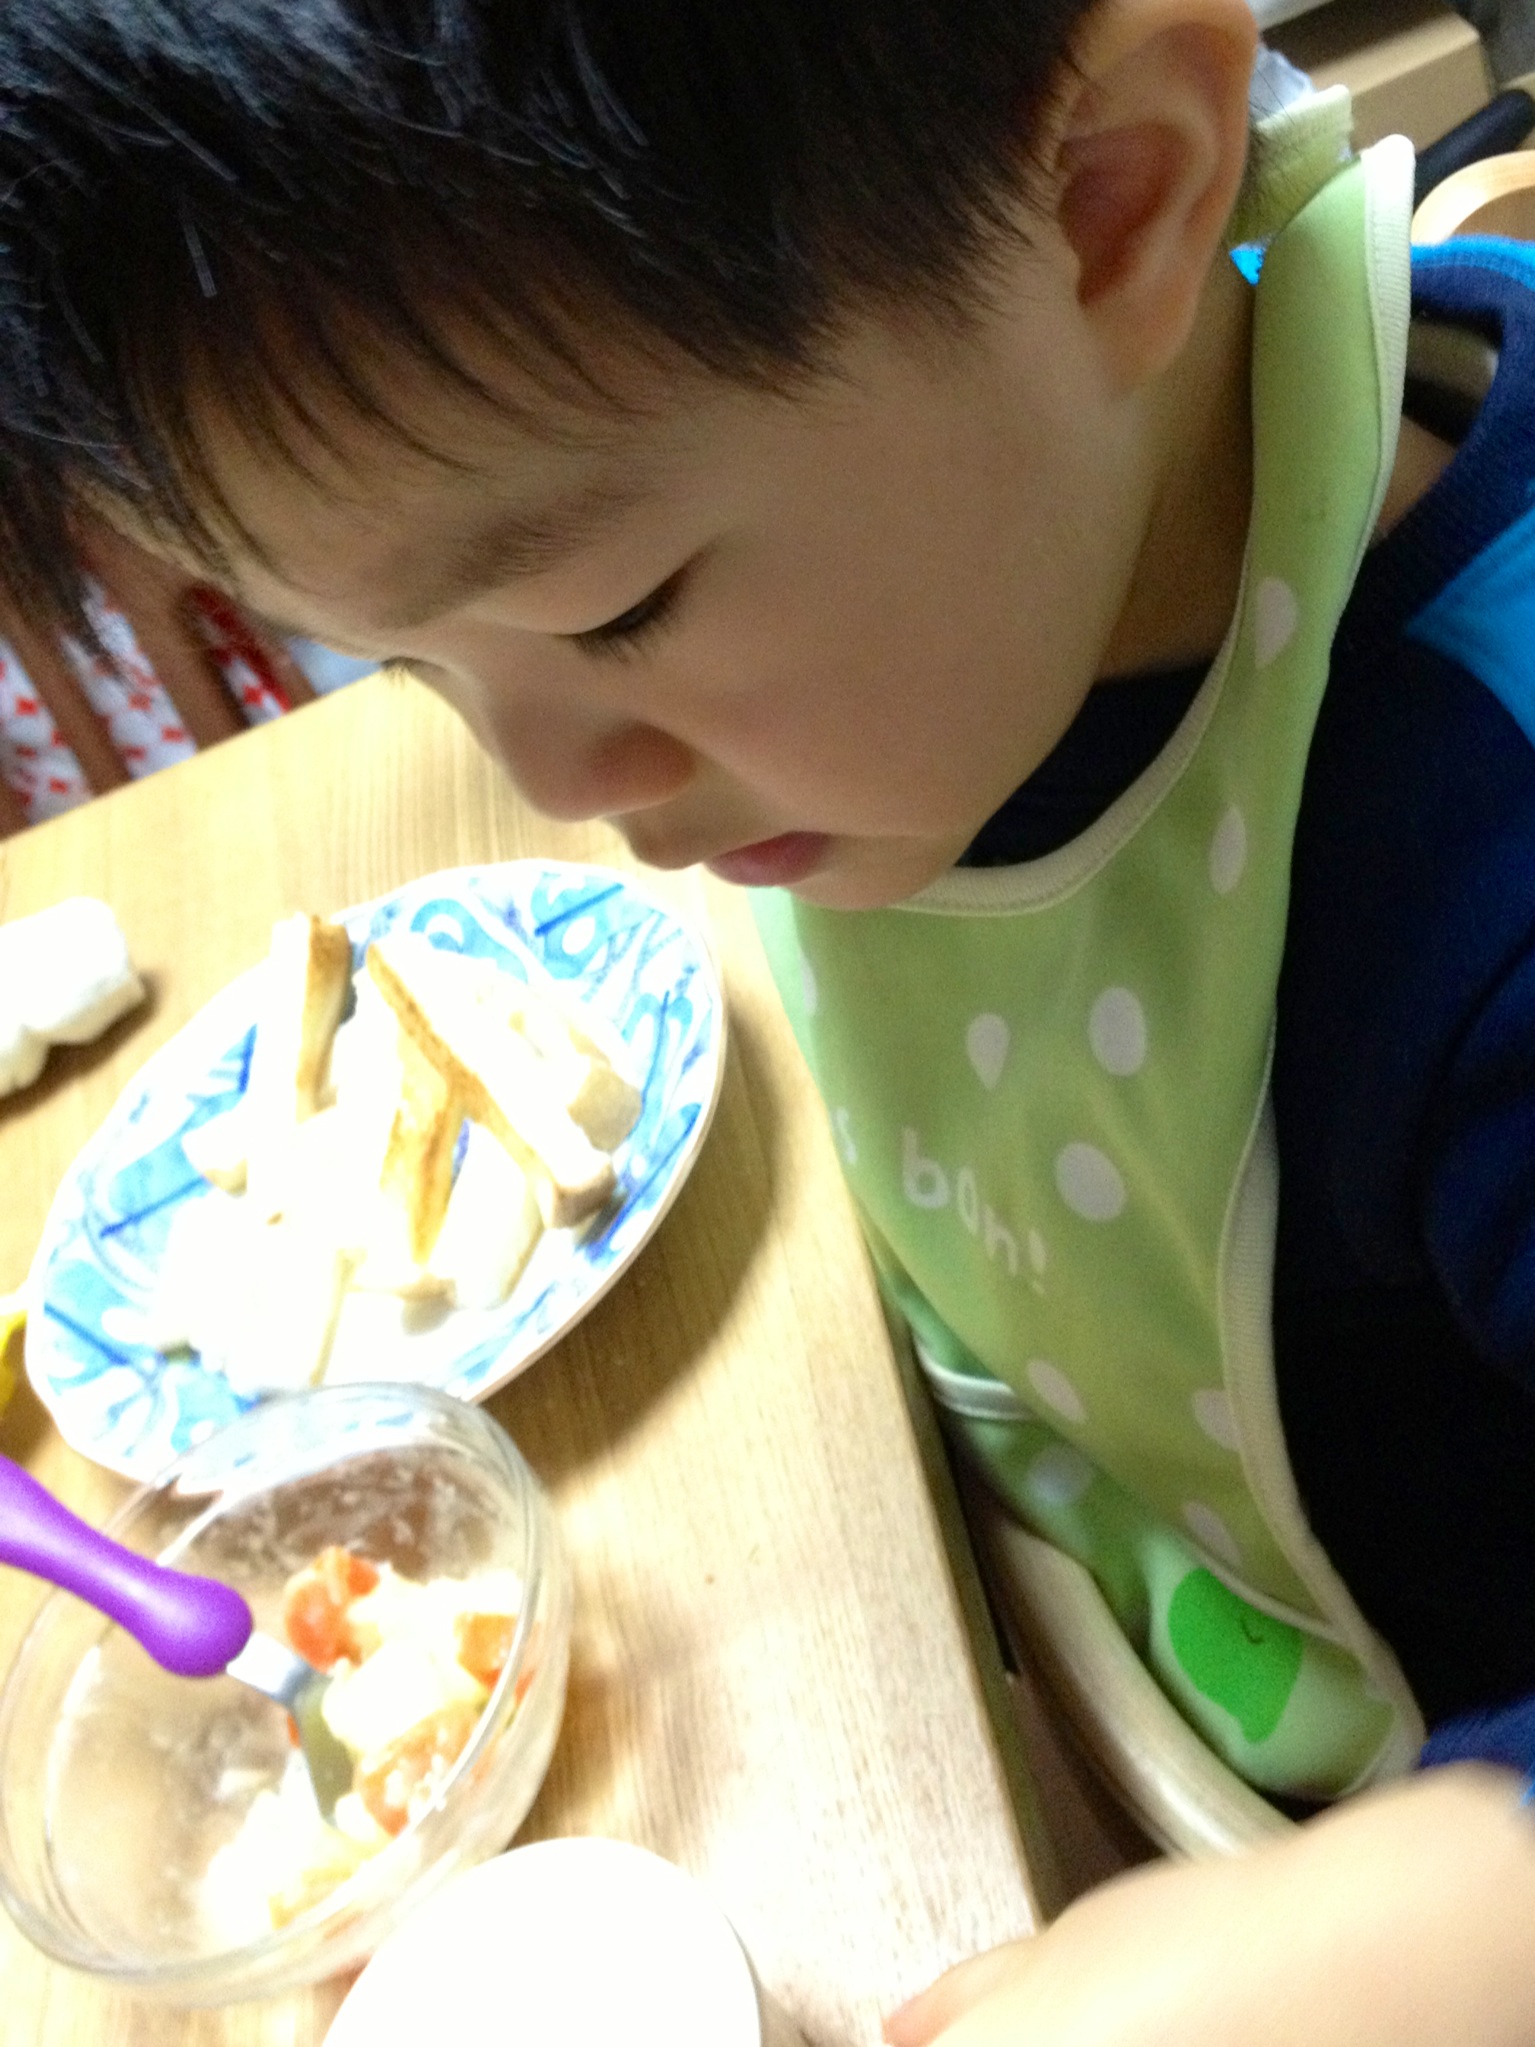 small child at a wooden table eating food